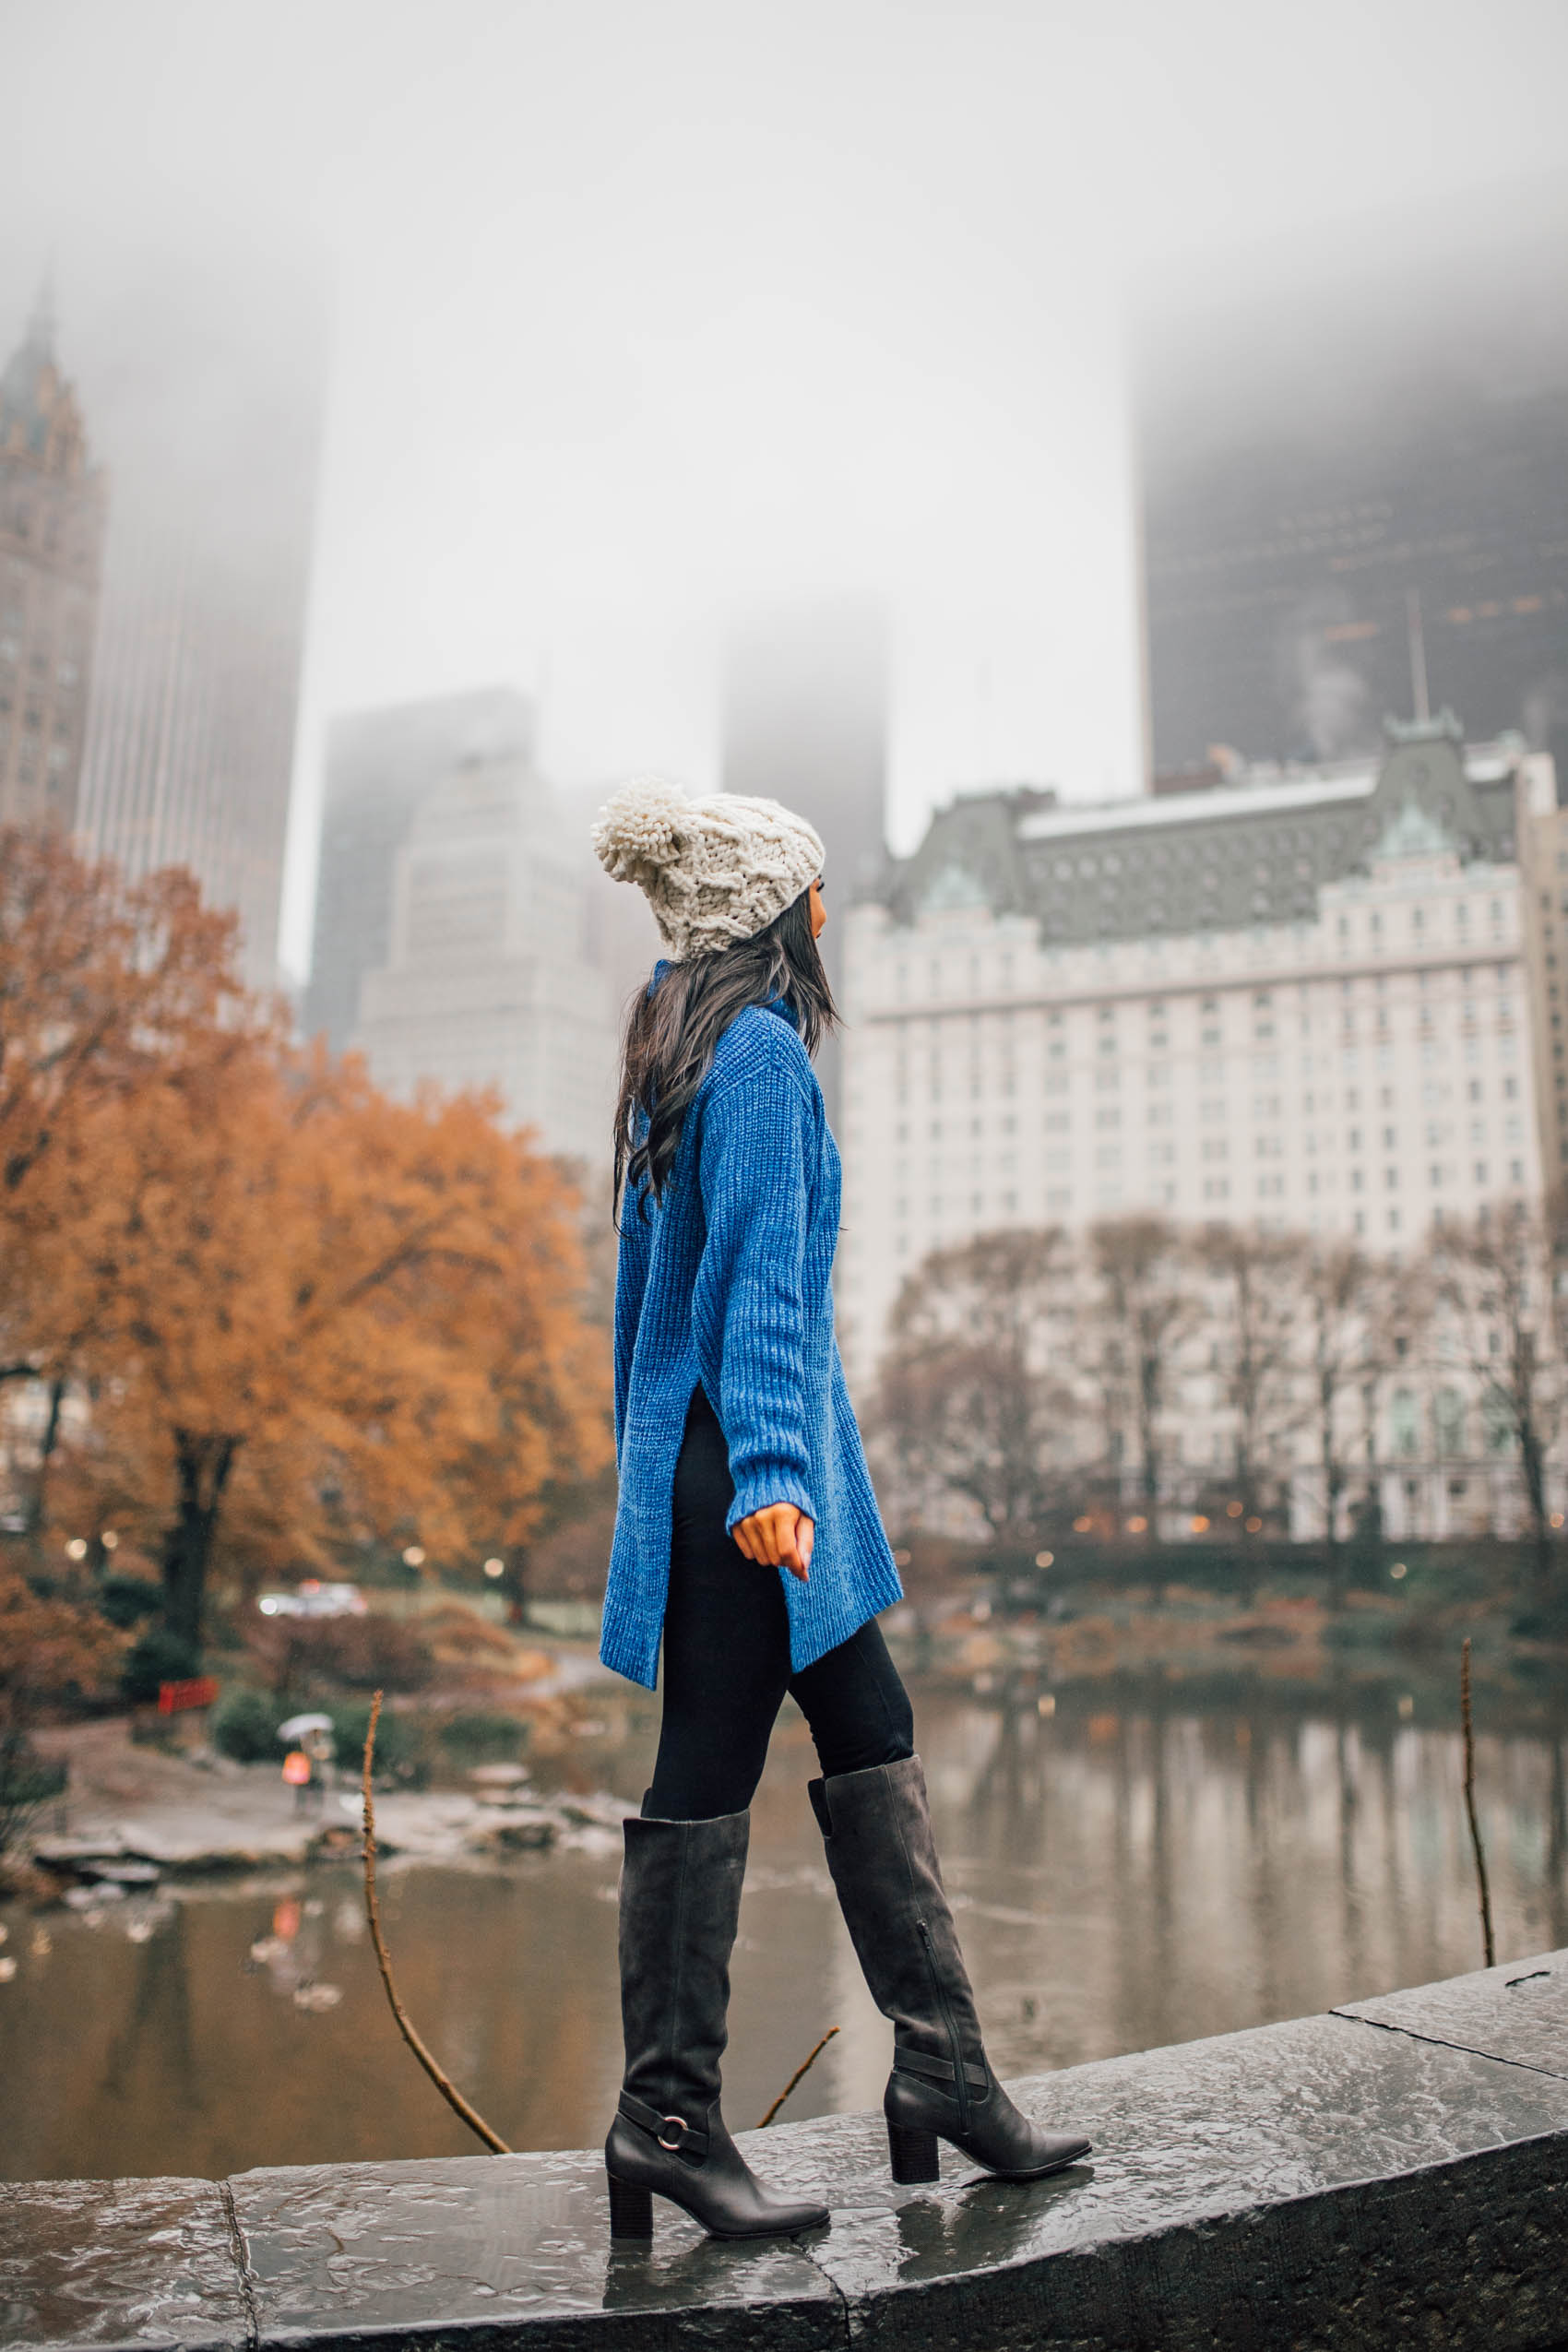 Blogger Hoang-Kim shares the best views in Central Park in New York City